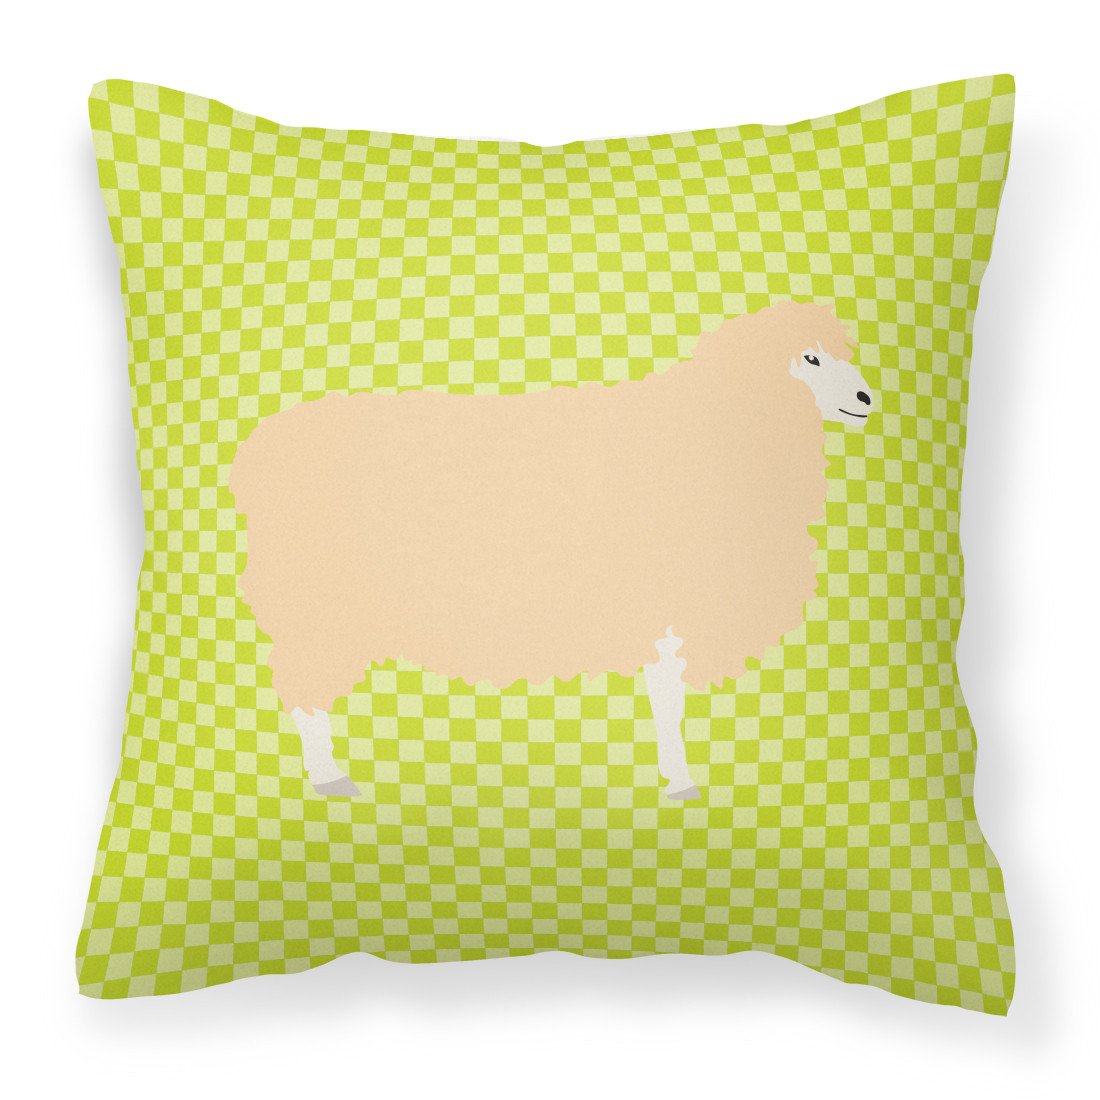 English Leicester Longwool Sheep Green Fabric Decorative Pillow BB7800PW1818 by Caroline's Treasures